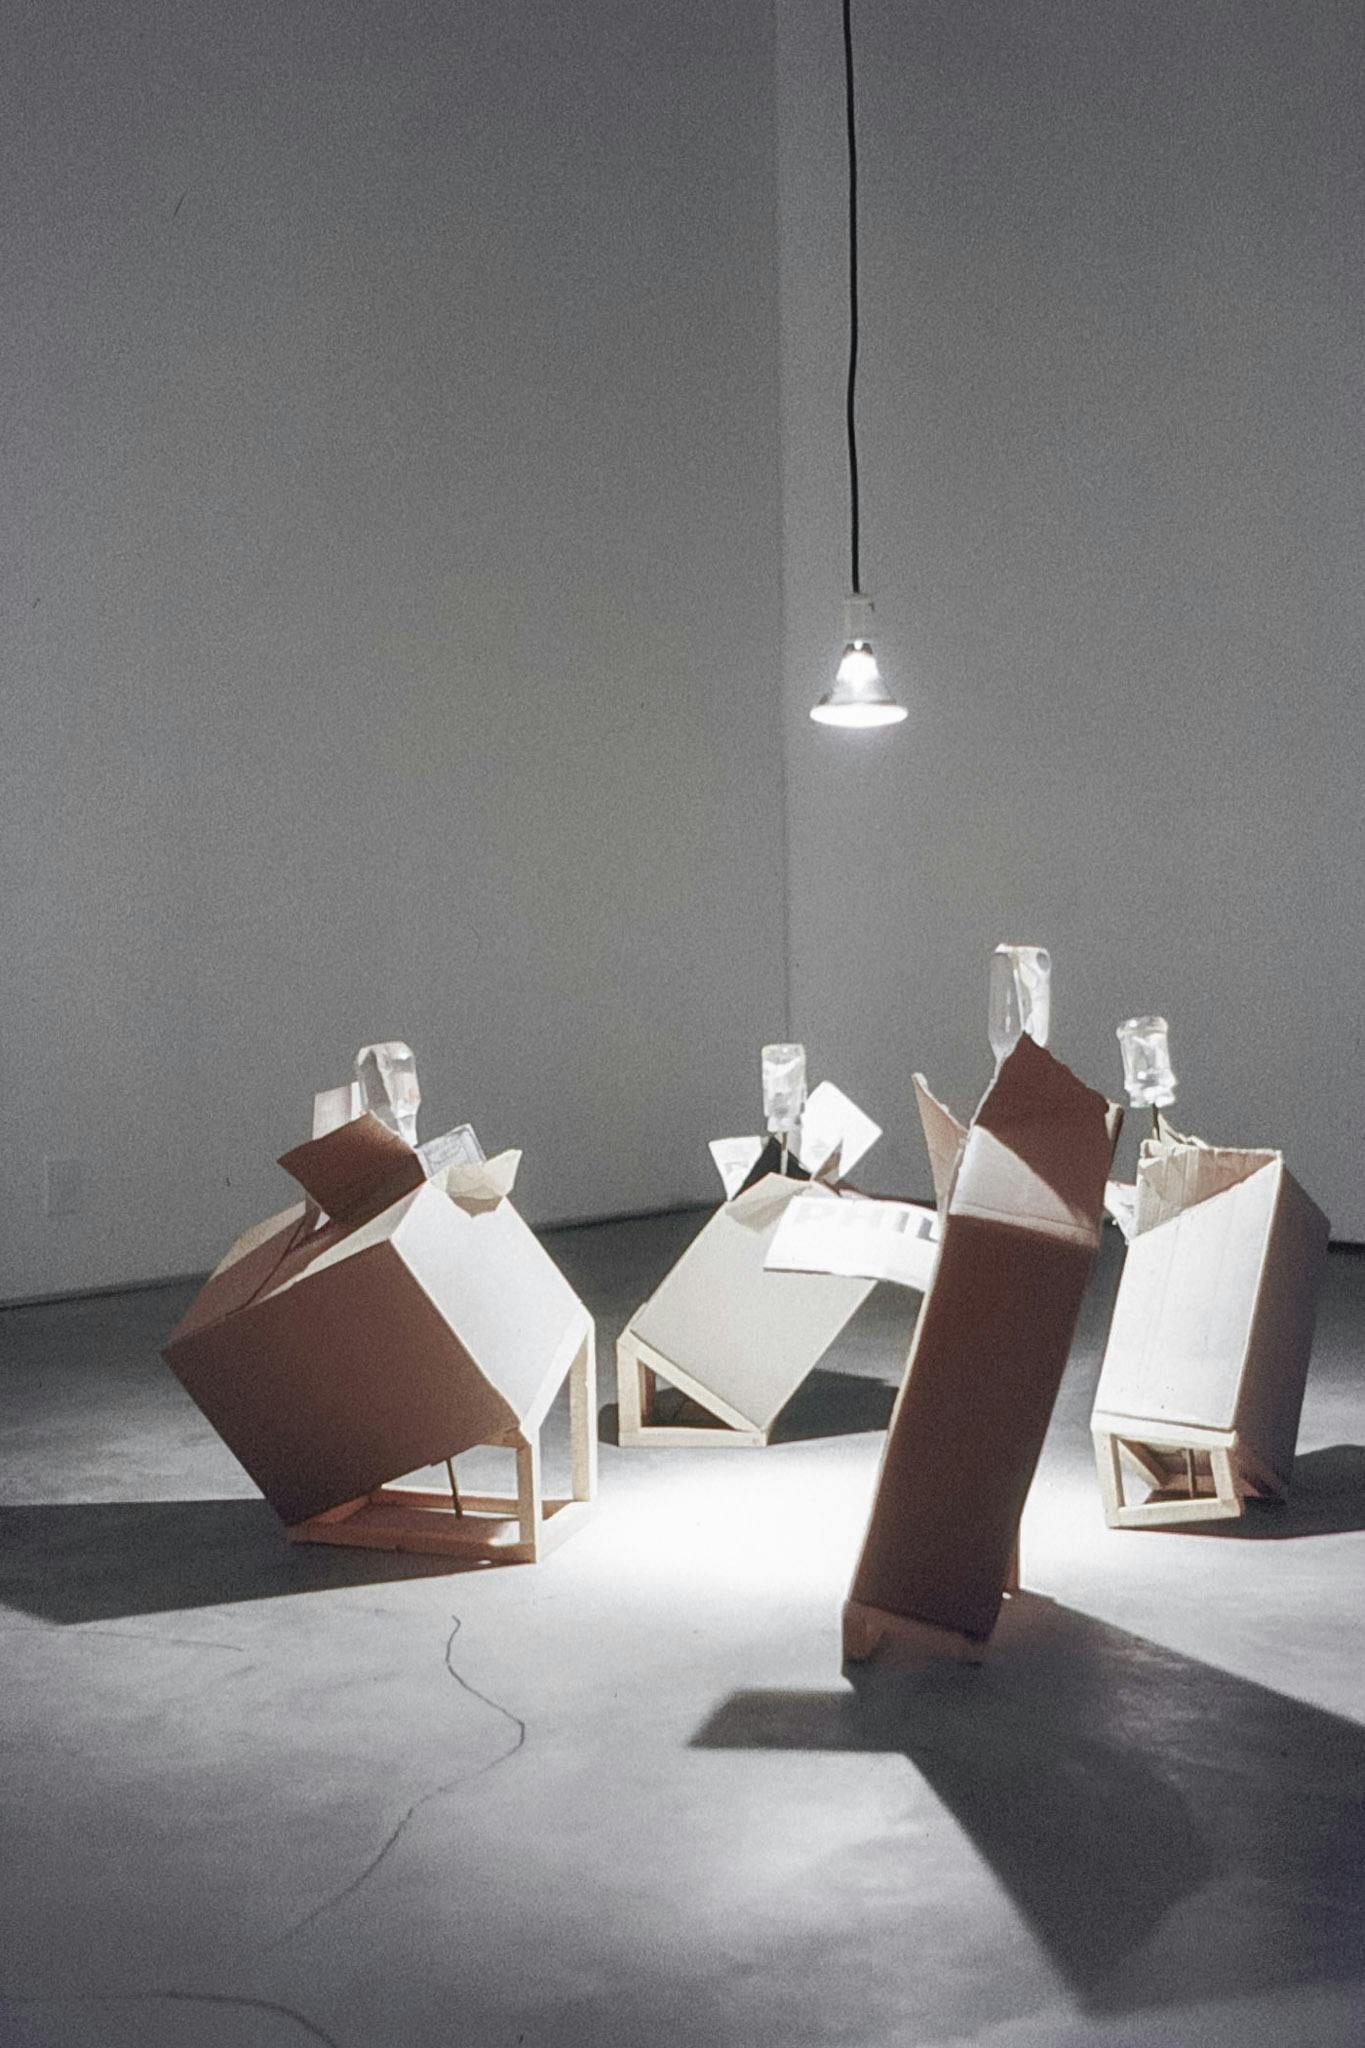 A lightbulb hangs low from the ceiling of a dark gallery space. 4 small sculptures are aglow. They are cardboard boxes, on small wood ramps, with large screwdrivers stuck in their opened corners.